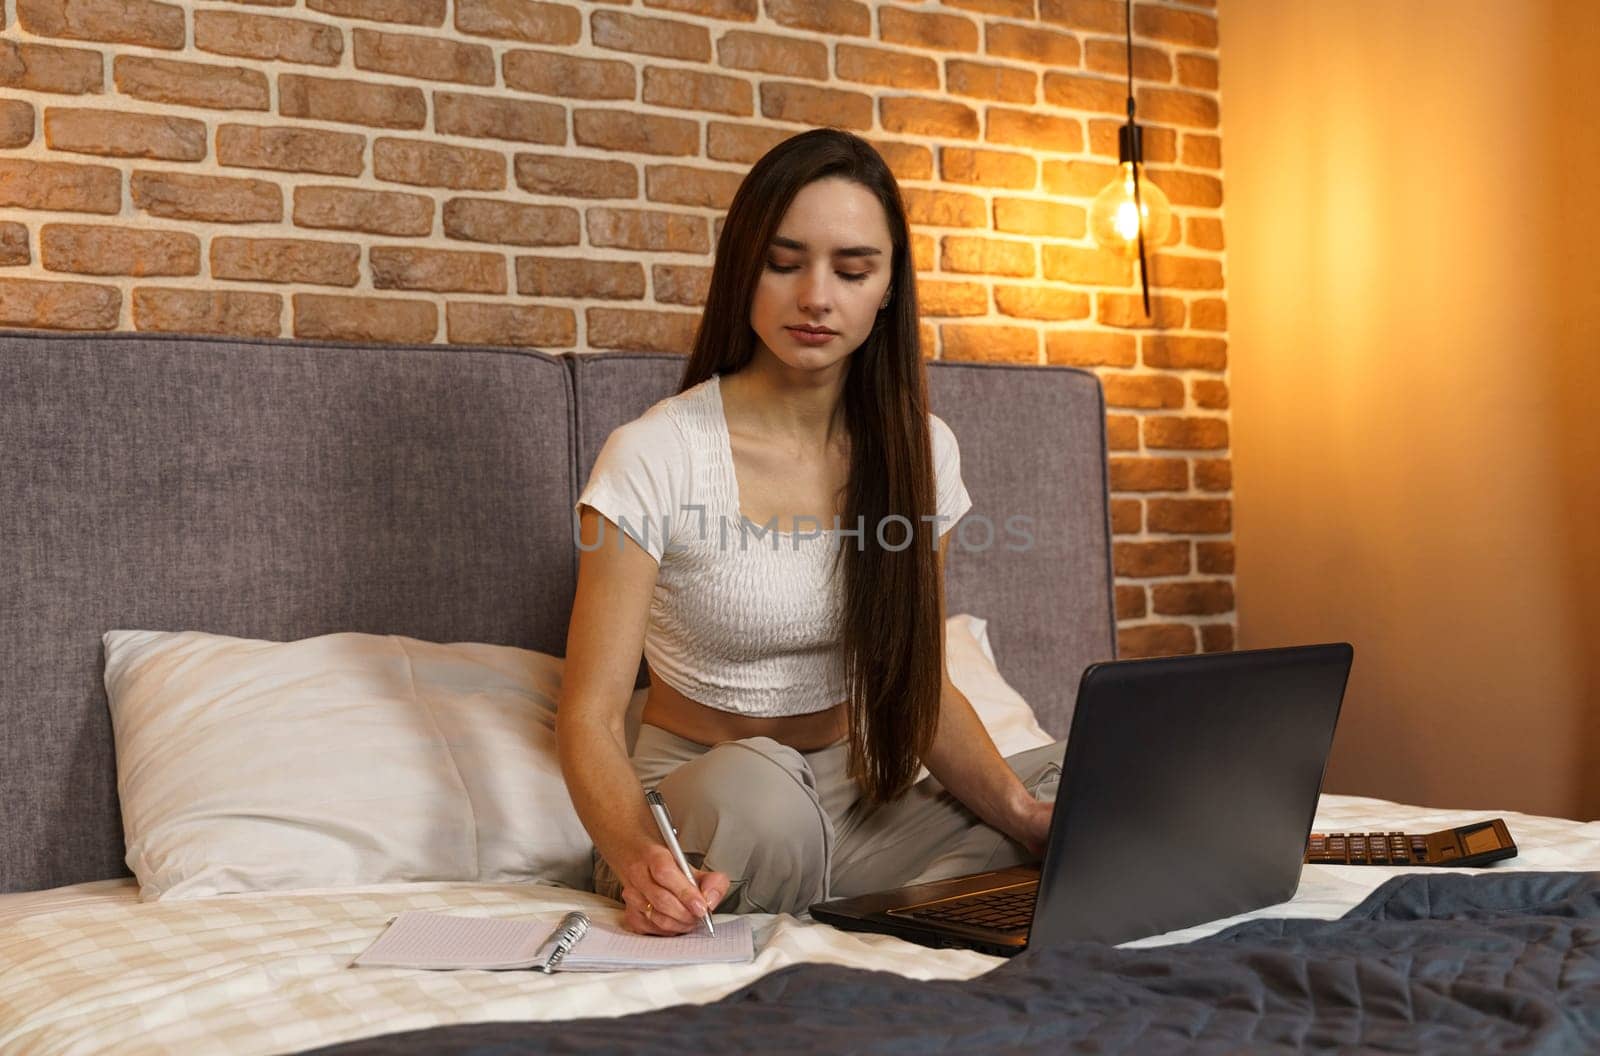 Happy beautiful woman sits on the bed, works on a laptop, makes notes in a notebook by Sd28DimoN_1976